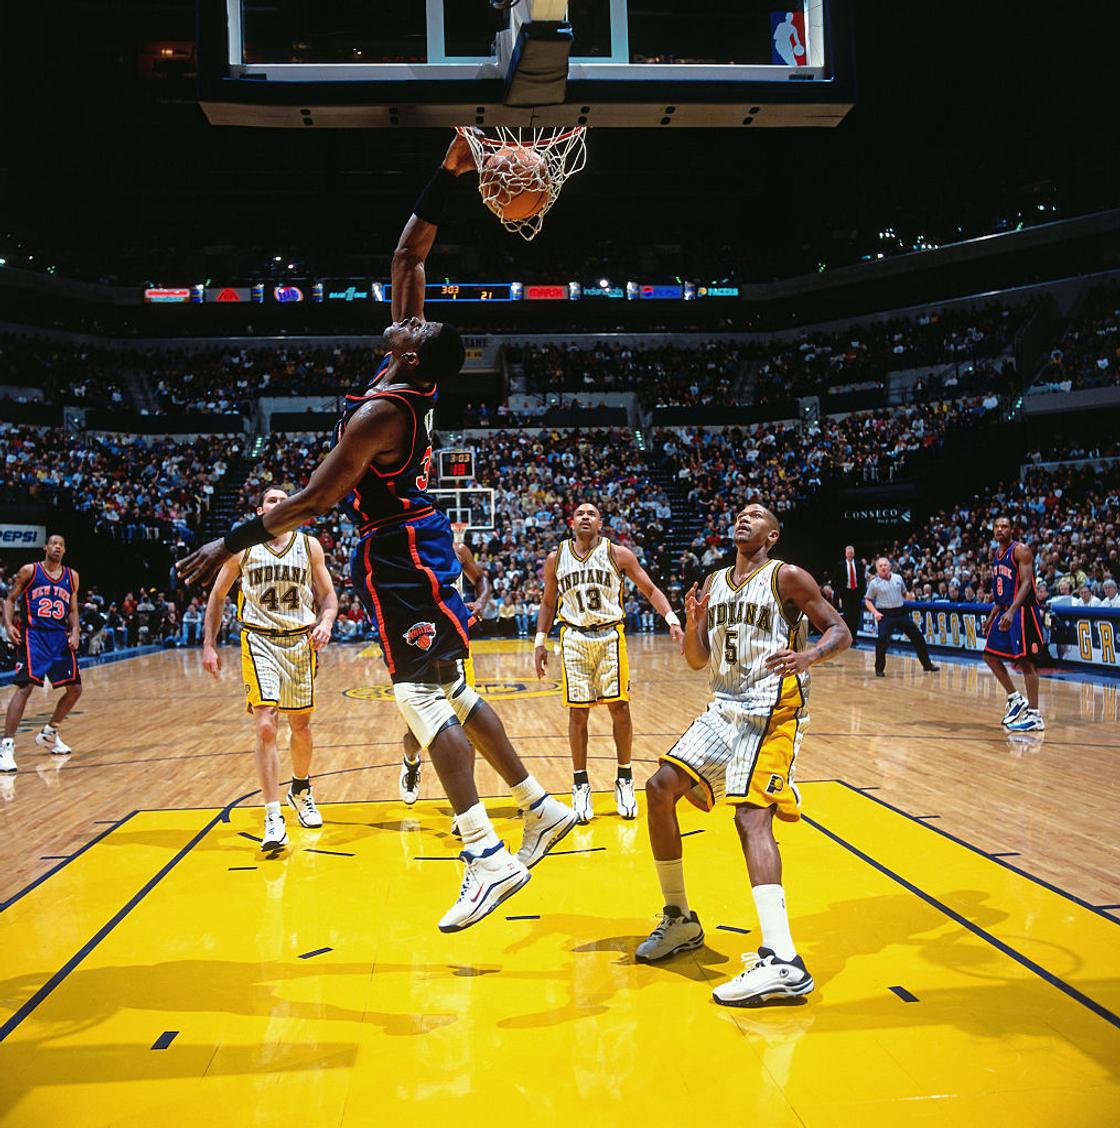 Patrick Ewing was one of the best dunkers in the NBA in the 90s.